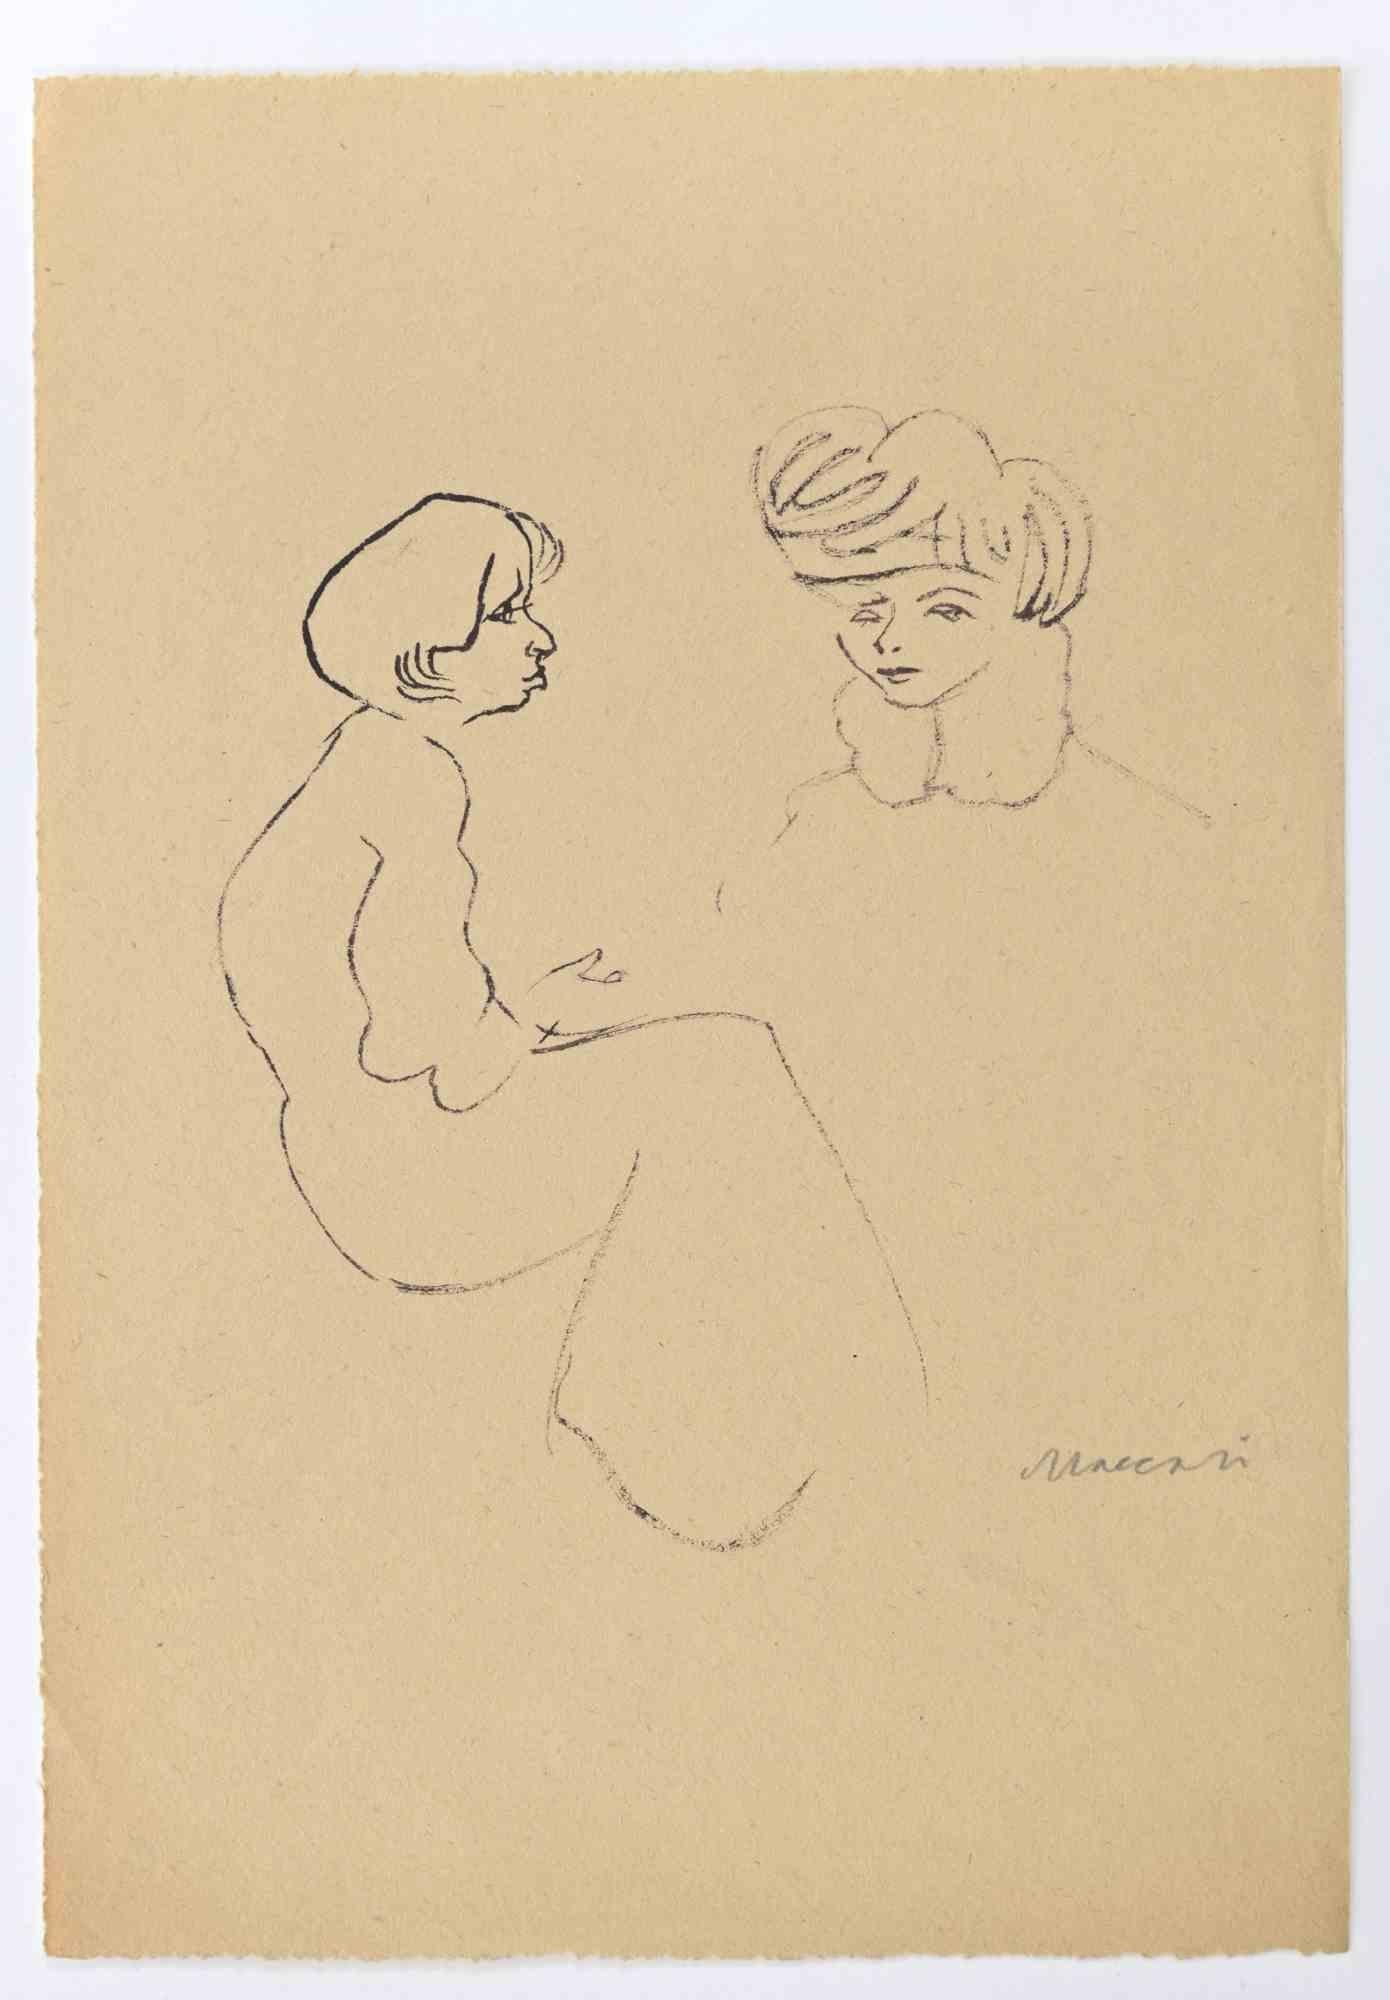 Ladies is a Pen Drawing realized by Mino Maccari  (1924-1989) in the 1950s.

Hand-signed on the lower.

Good condition.

Mino Maccari (Siena, 1924-Rome, June 16, 1989) was an Italian writer, painter, engraver and journalist, winner of the